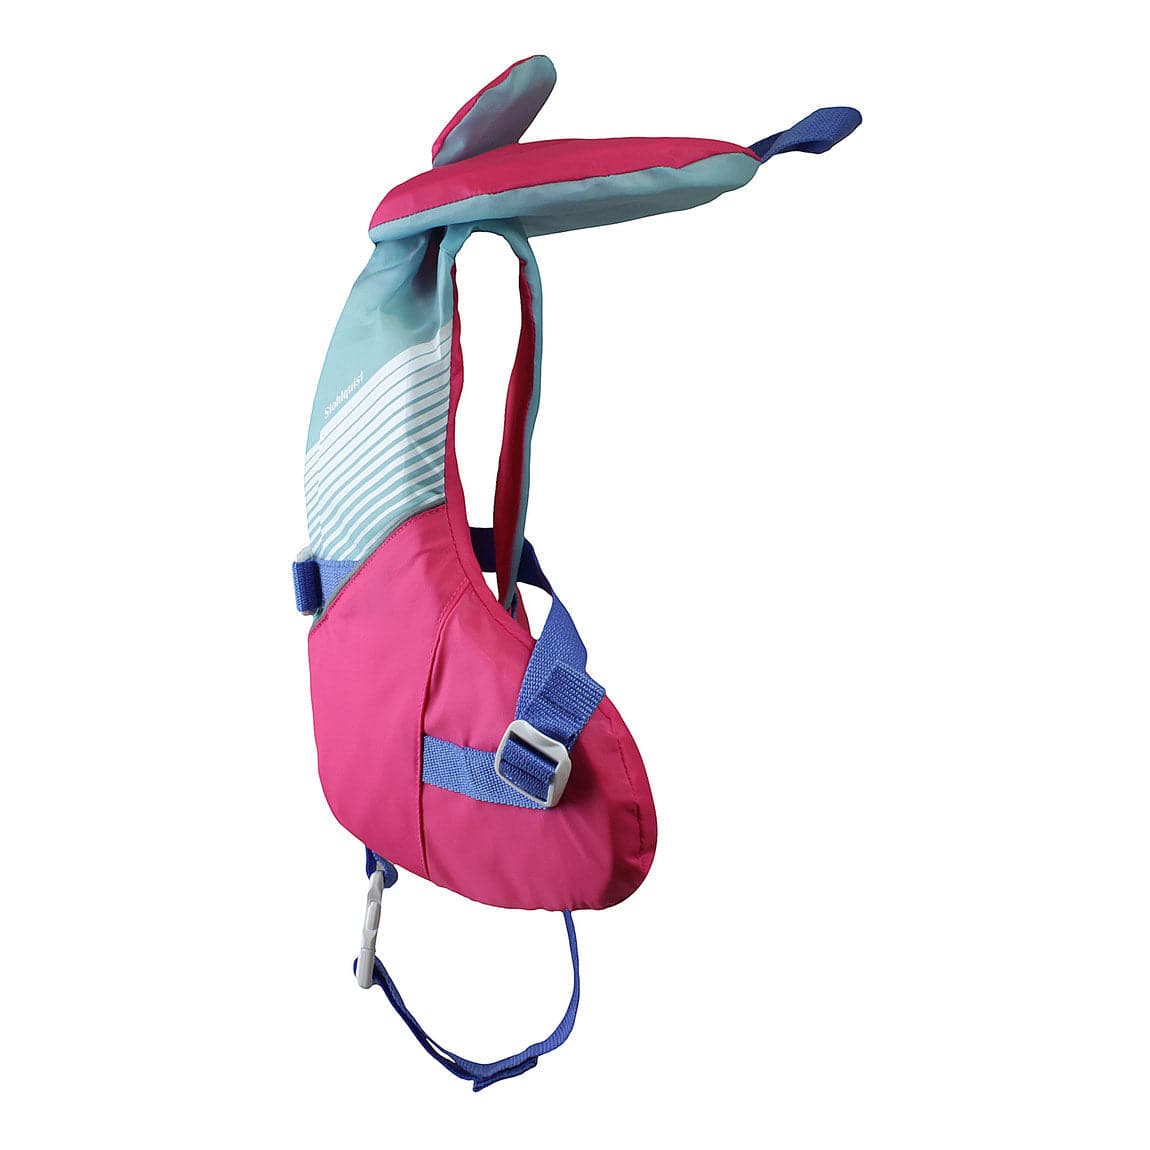 Featuring the Infant & Child PFDs kid's pfd manufactured by Stohlquist shown here from a second angle.